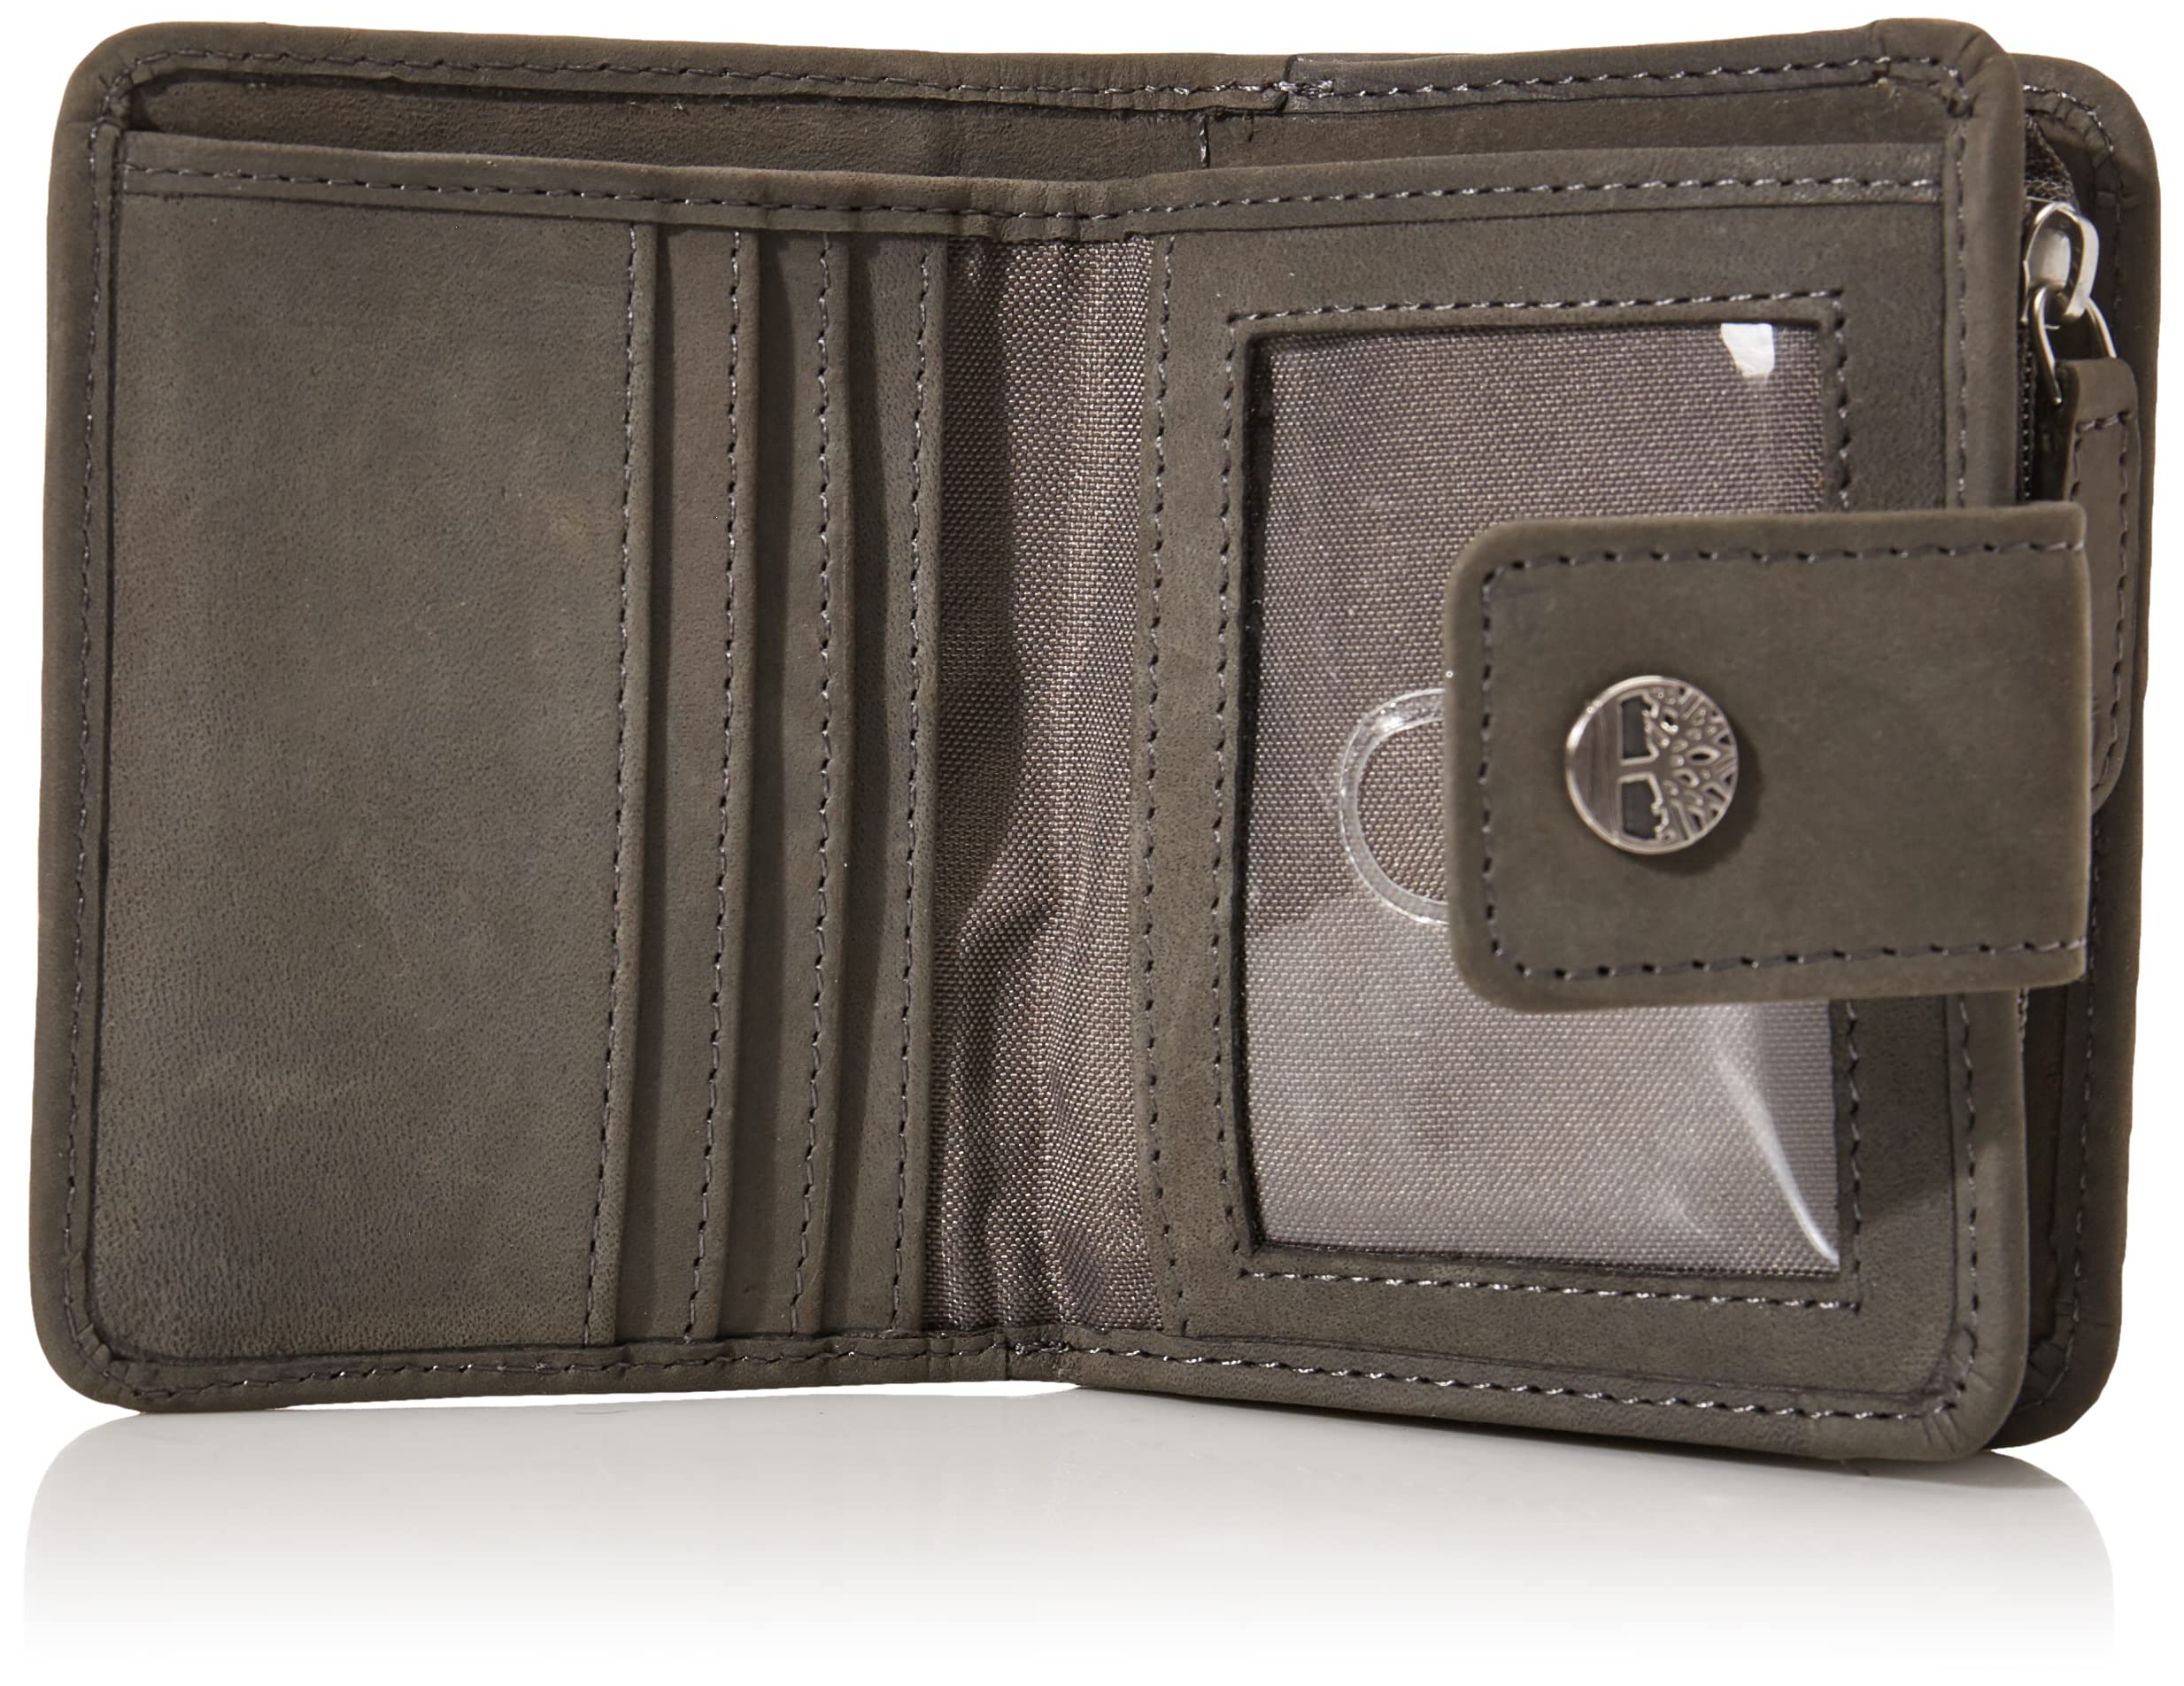 Timberland Women's Leather RFID Small Indexer Wallet Billfold